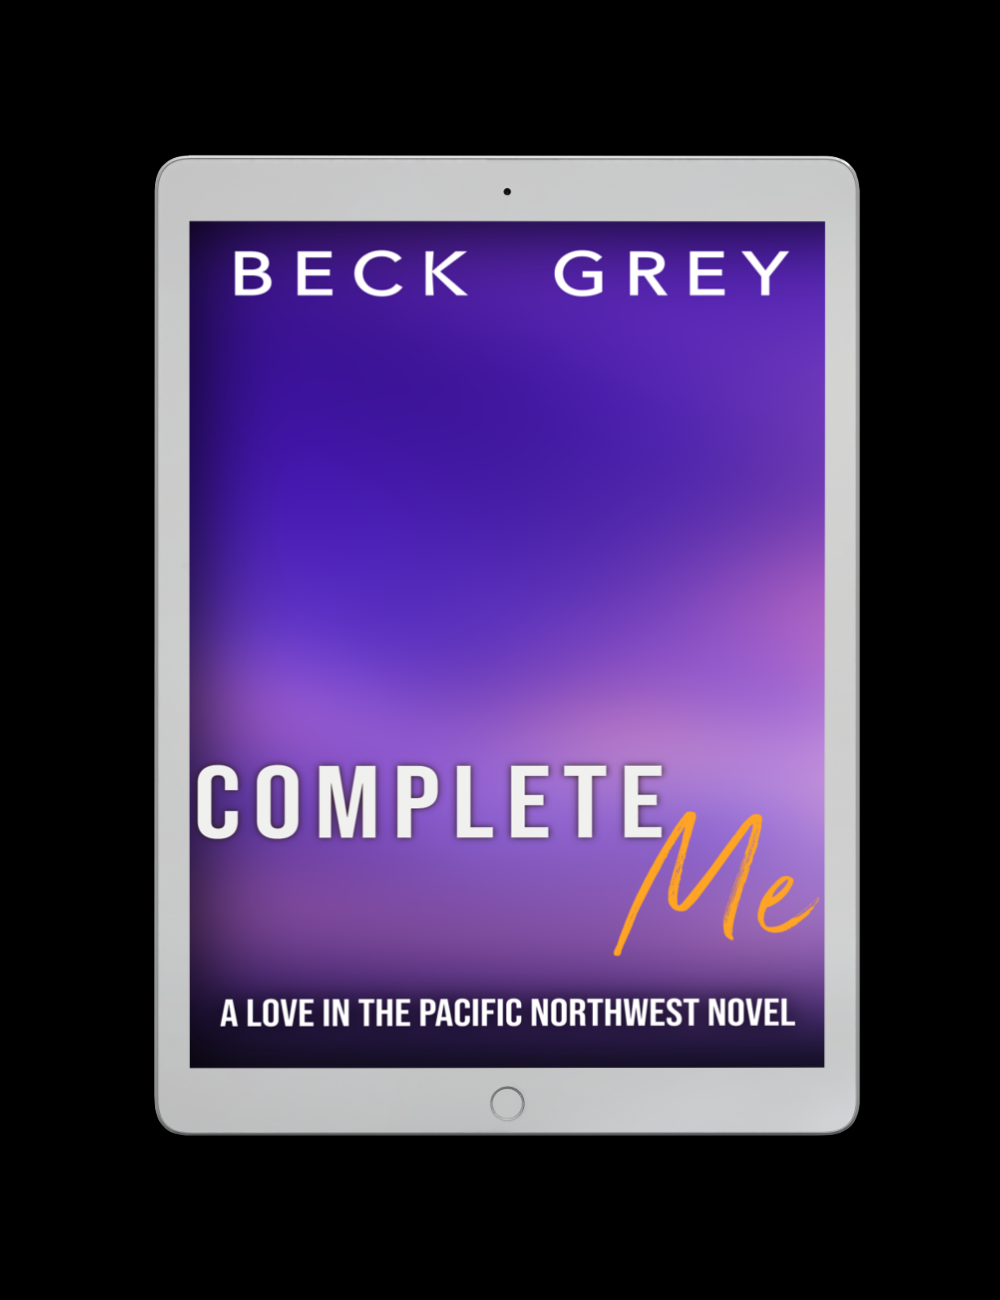 White eBook reader, purple background, Beck Grey Complete Me, A Love in the Pacific Northwest Novel